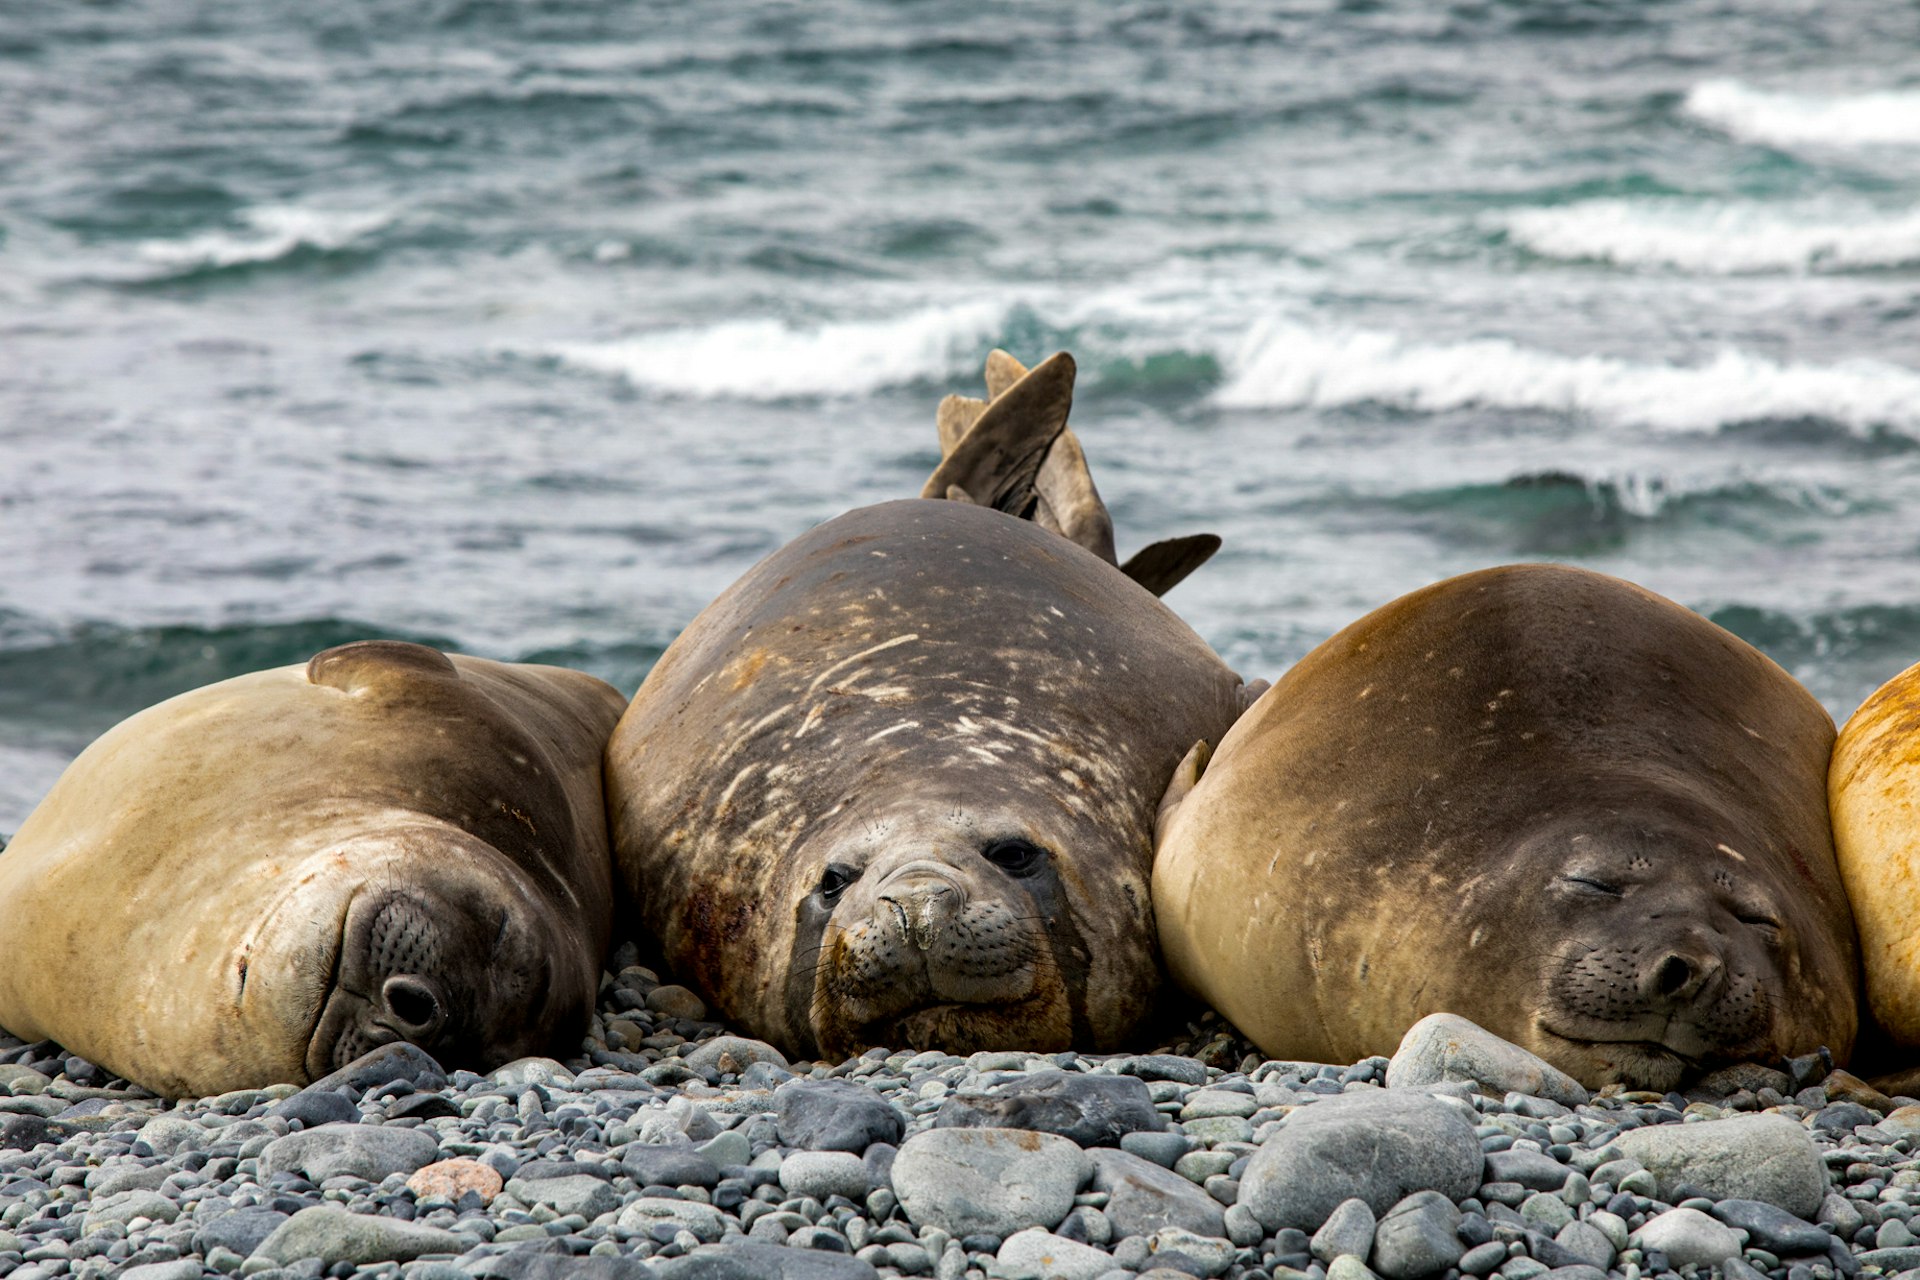 Three seals relaxing together on a pebbled beach.